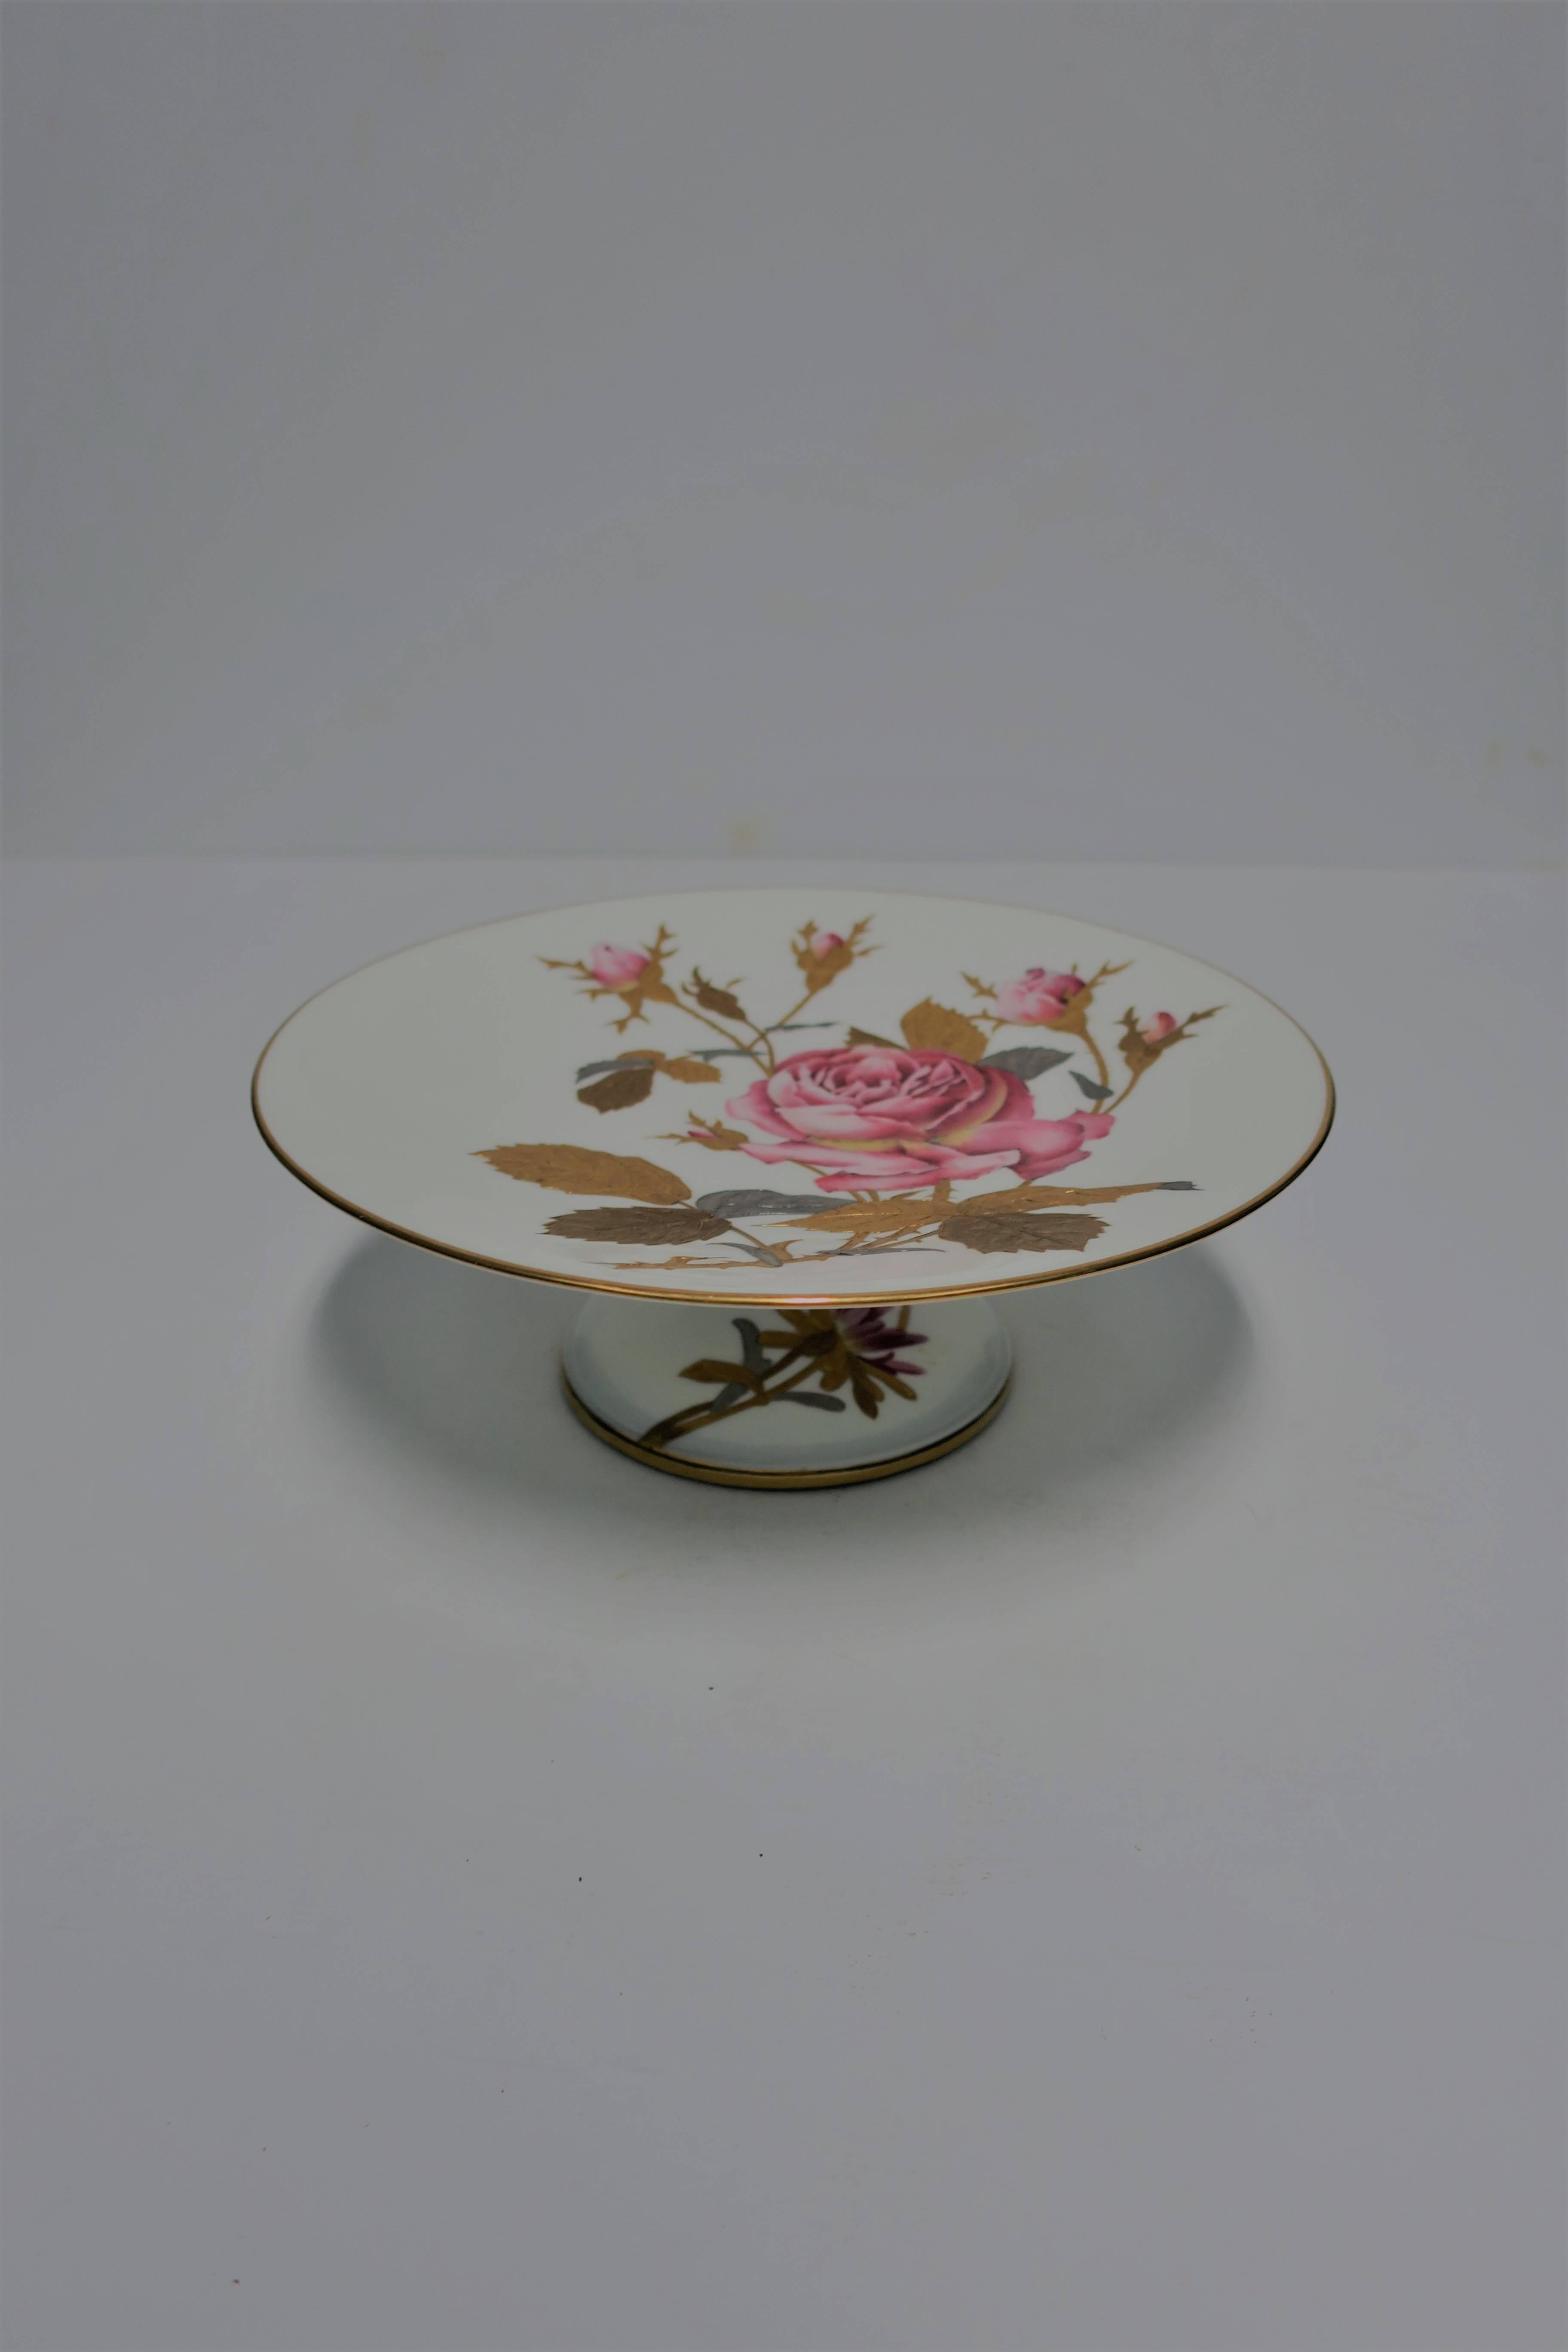 20th Century European White Porcelain Pedestal Dessert Plate with Pink Roses and Gold Leaves For Sale